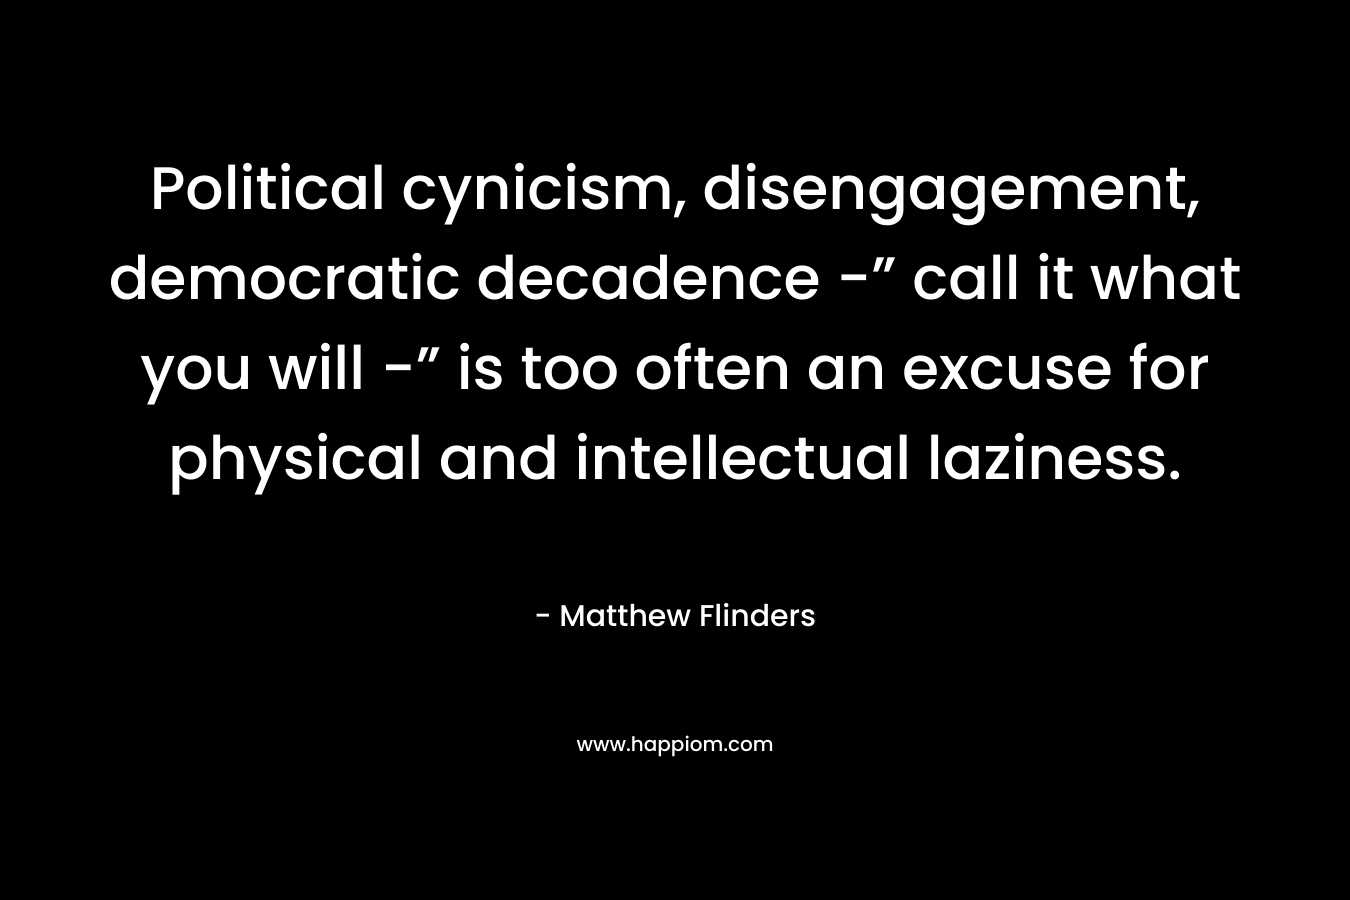 Political cynicism, disengagement, democratic decadence -” call it what you will -” is too often an excuse for physical and intellectual laziness. – Matthew Flinders